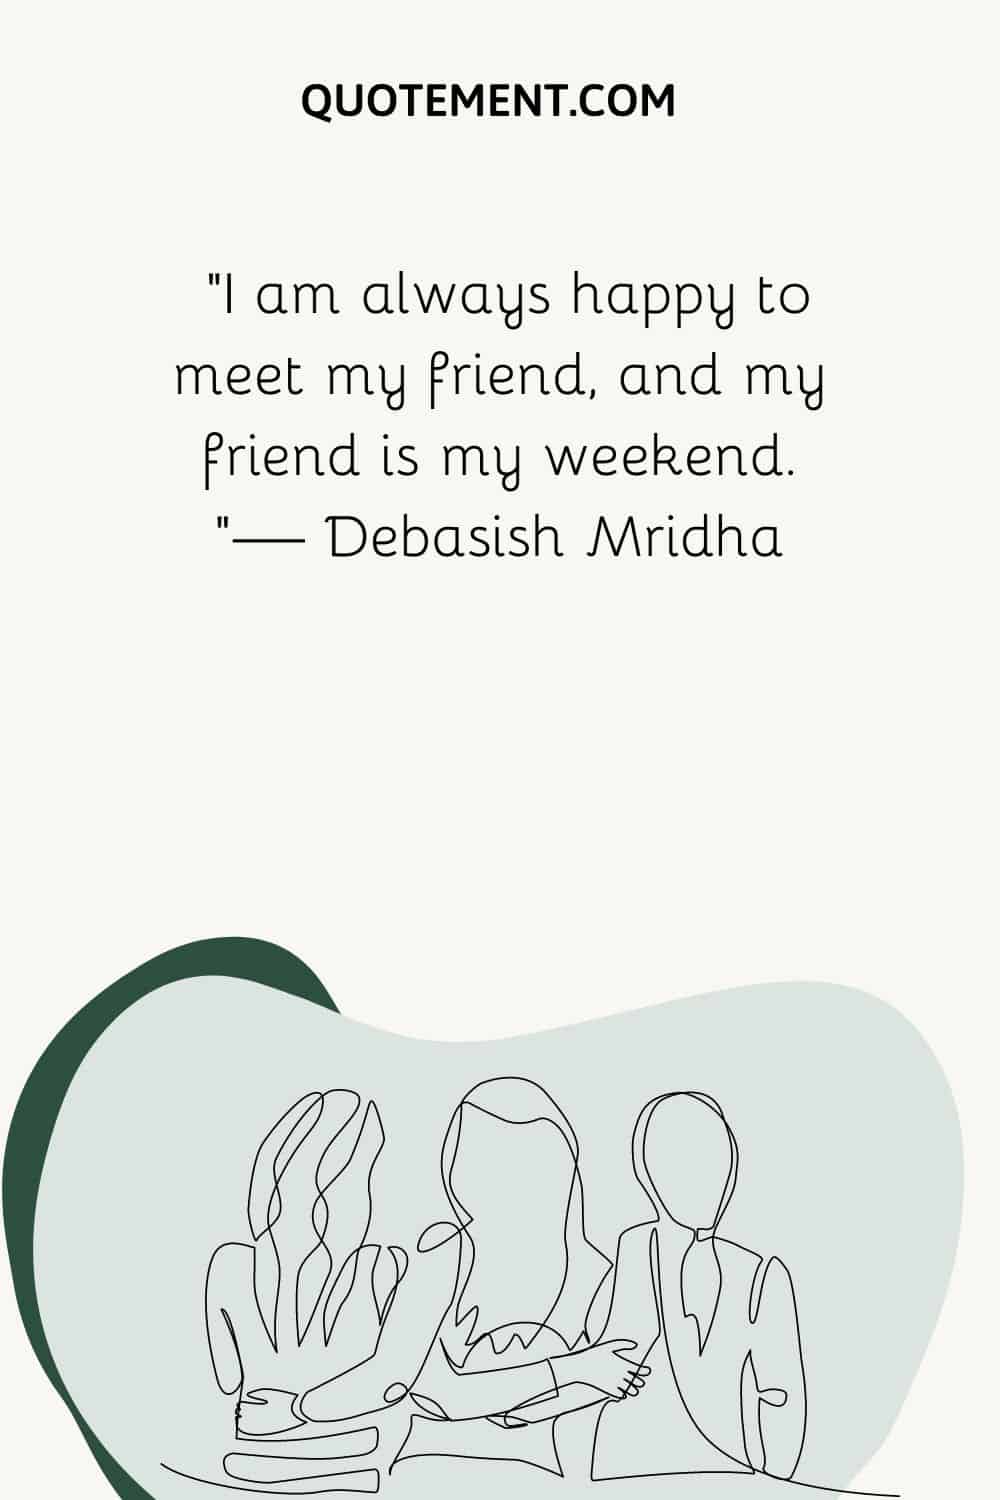 three girls hugged illustration representing funny ready for the weekend quote